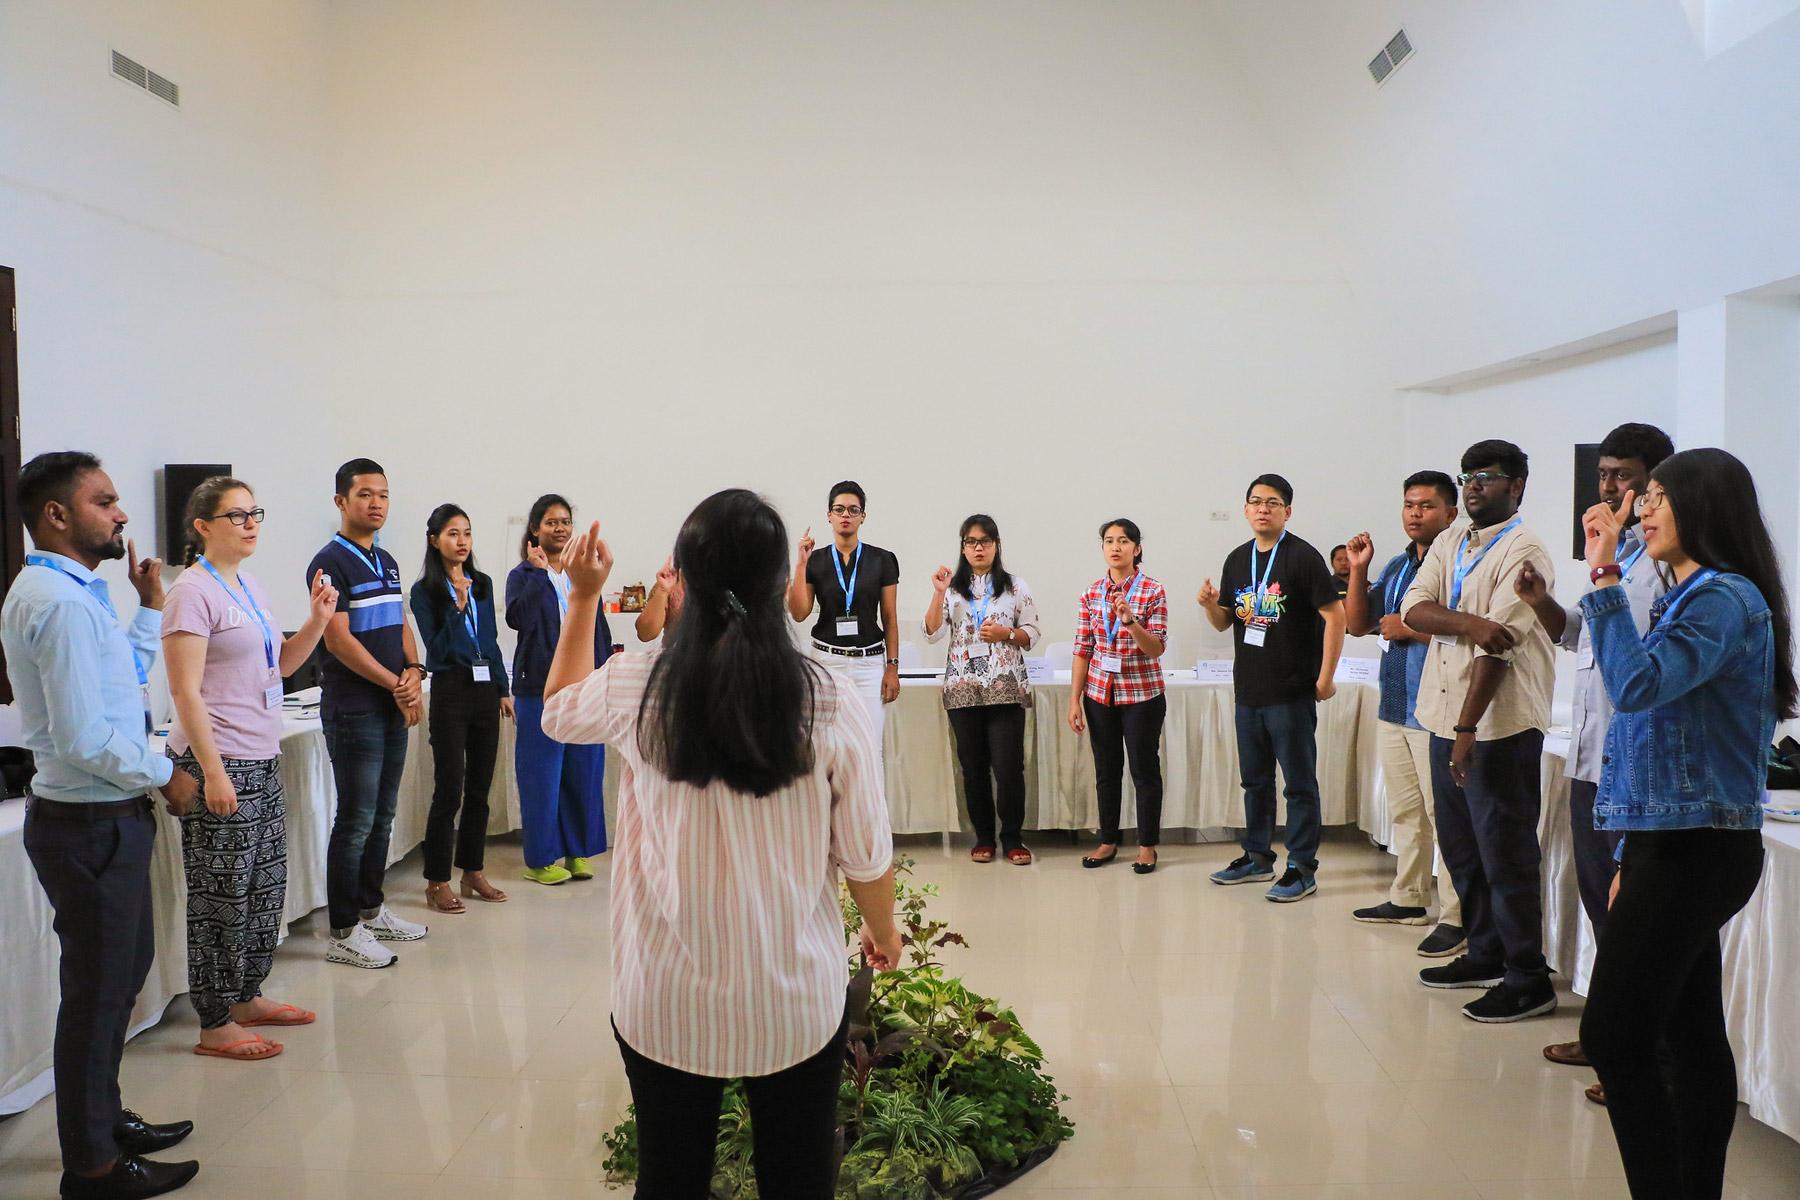 Morning Devotion during the Global Young Reformersâ Network 2.0 Asia Regional Meeting in 2019. Photo: LWF/Johanan Celine Valeriano